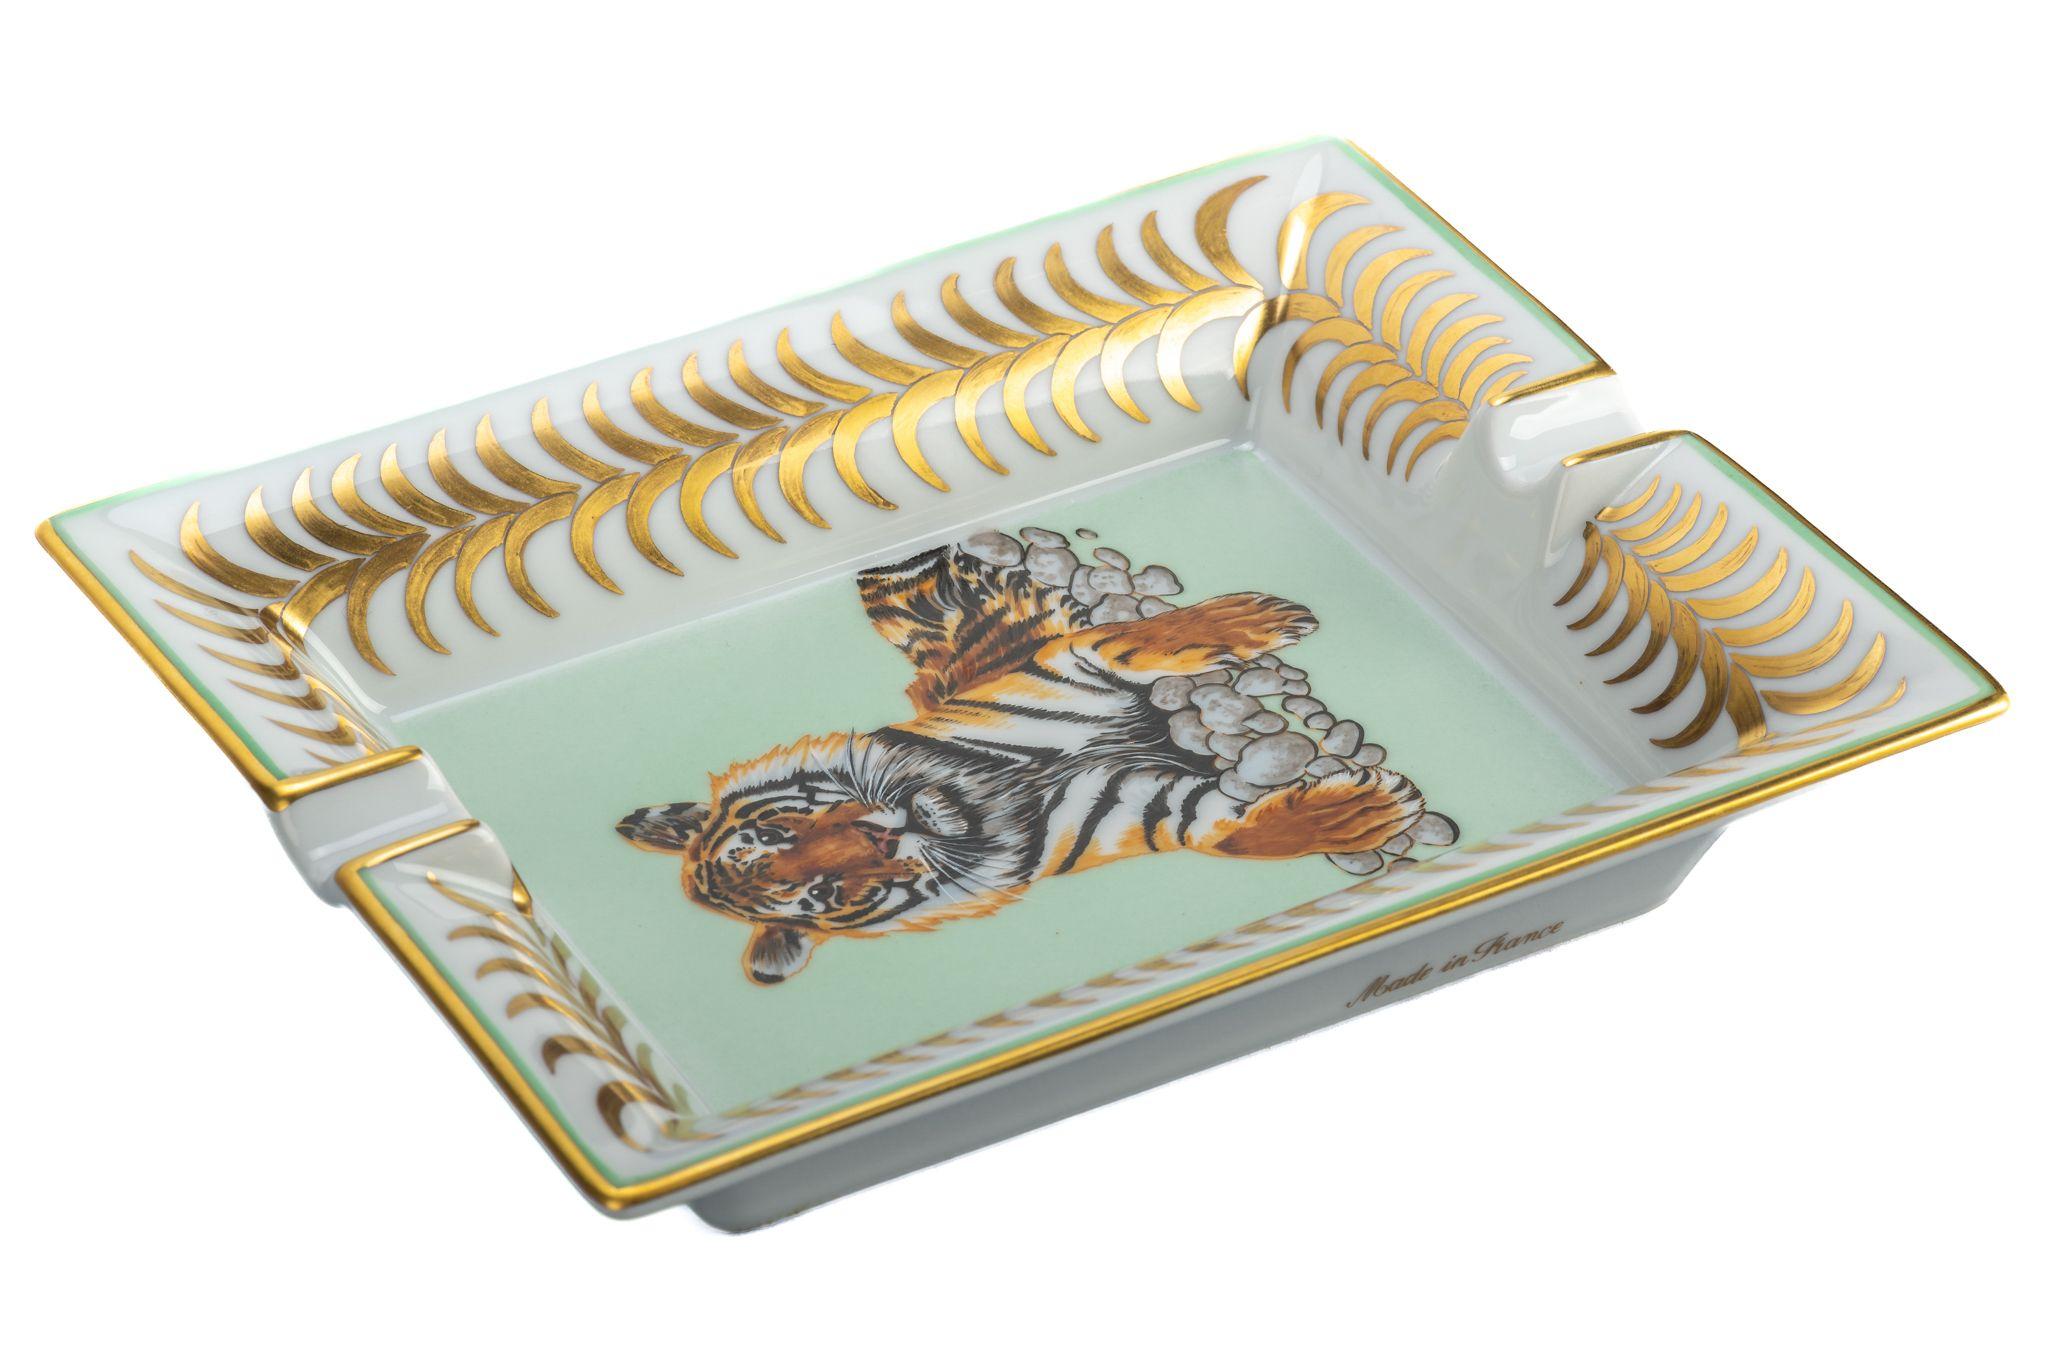 Hermes aqua, white and gold porcelain ashtray with imperial tiger design.